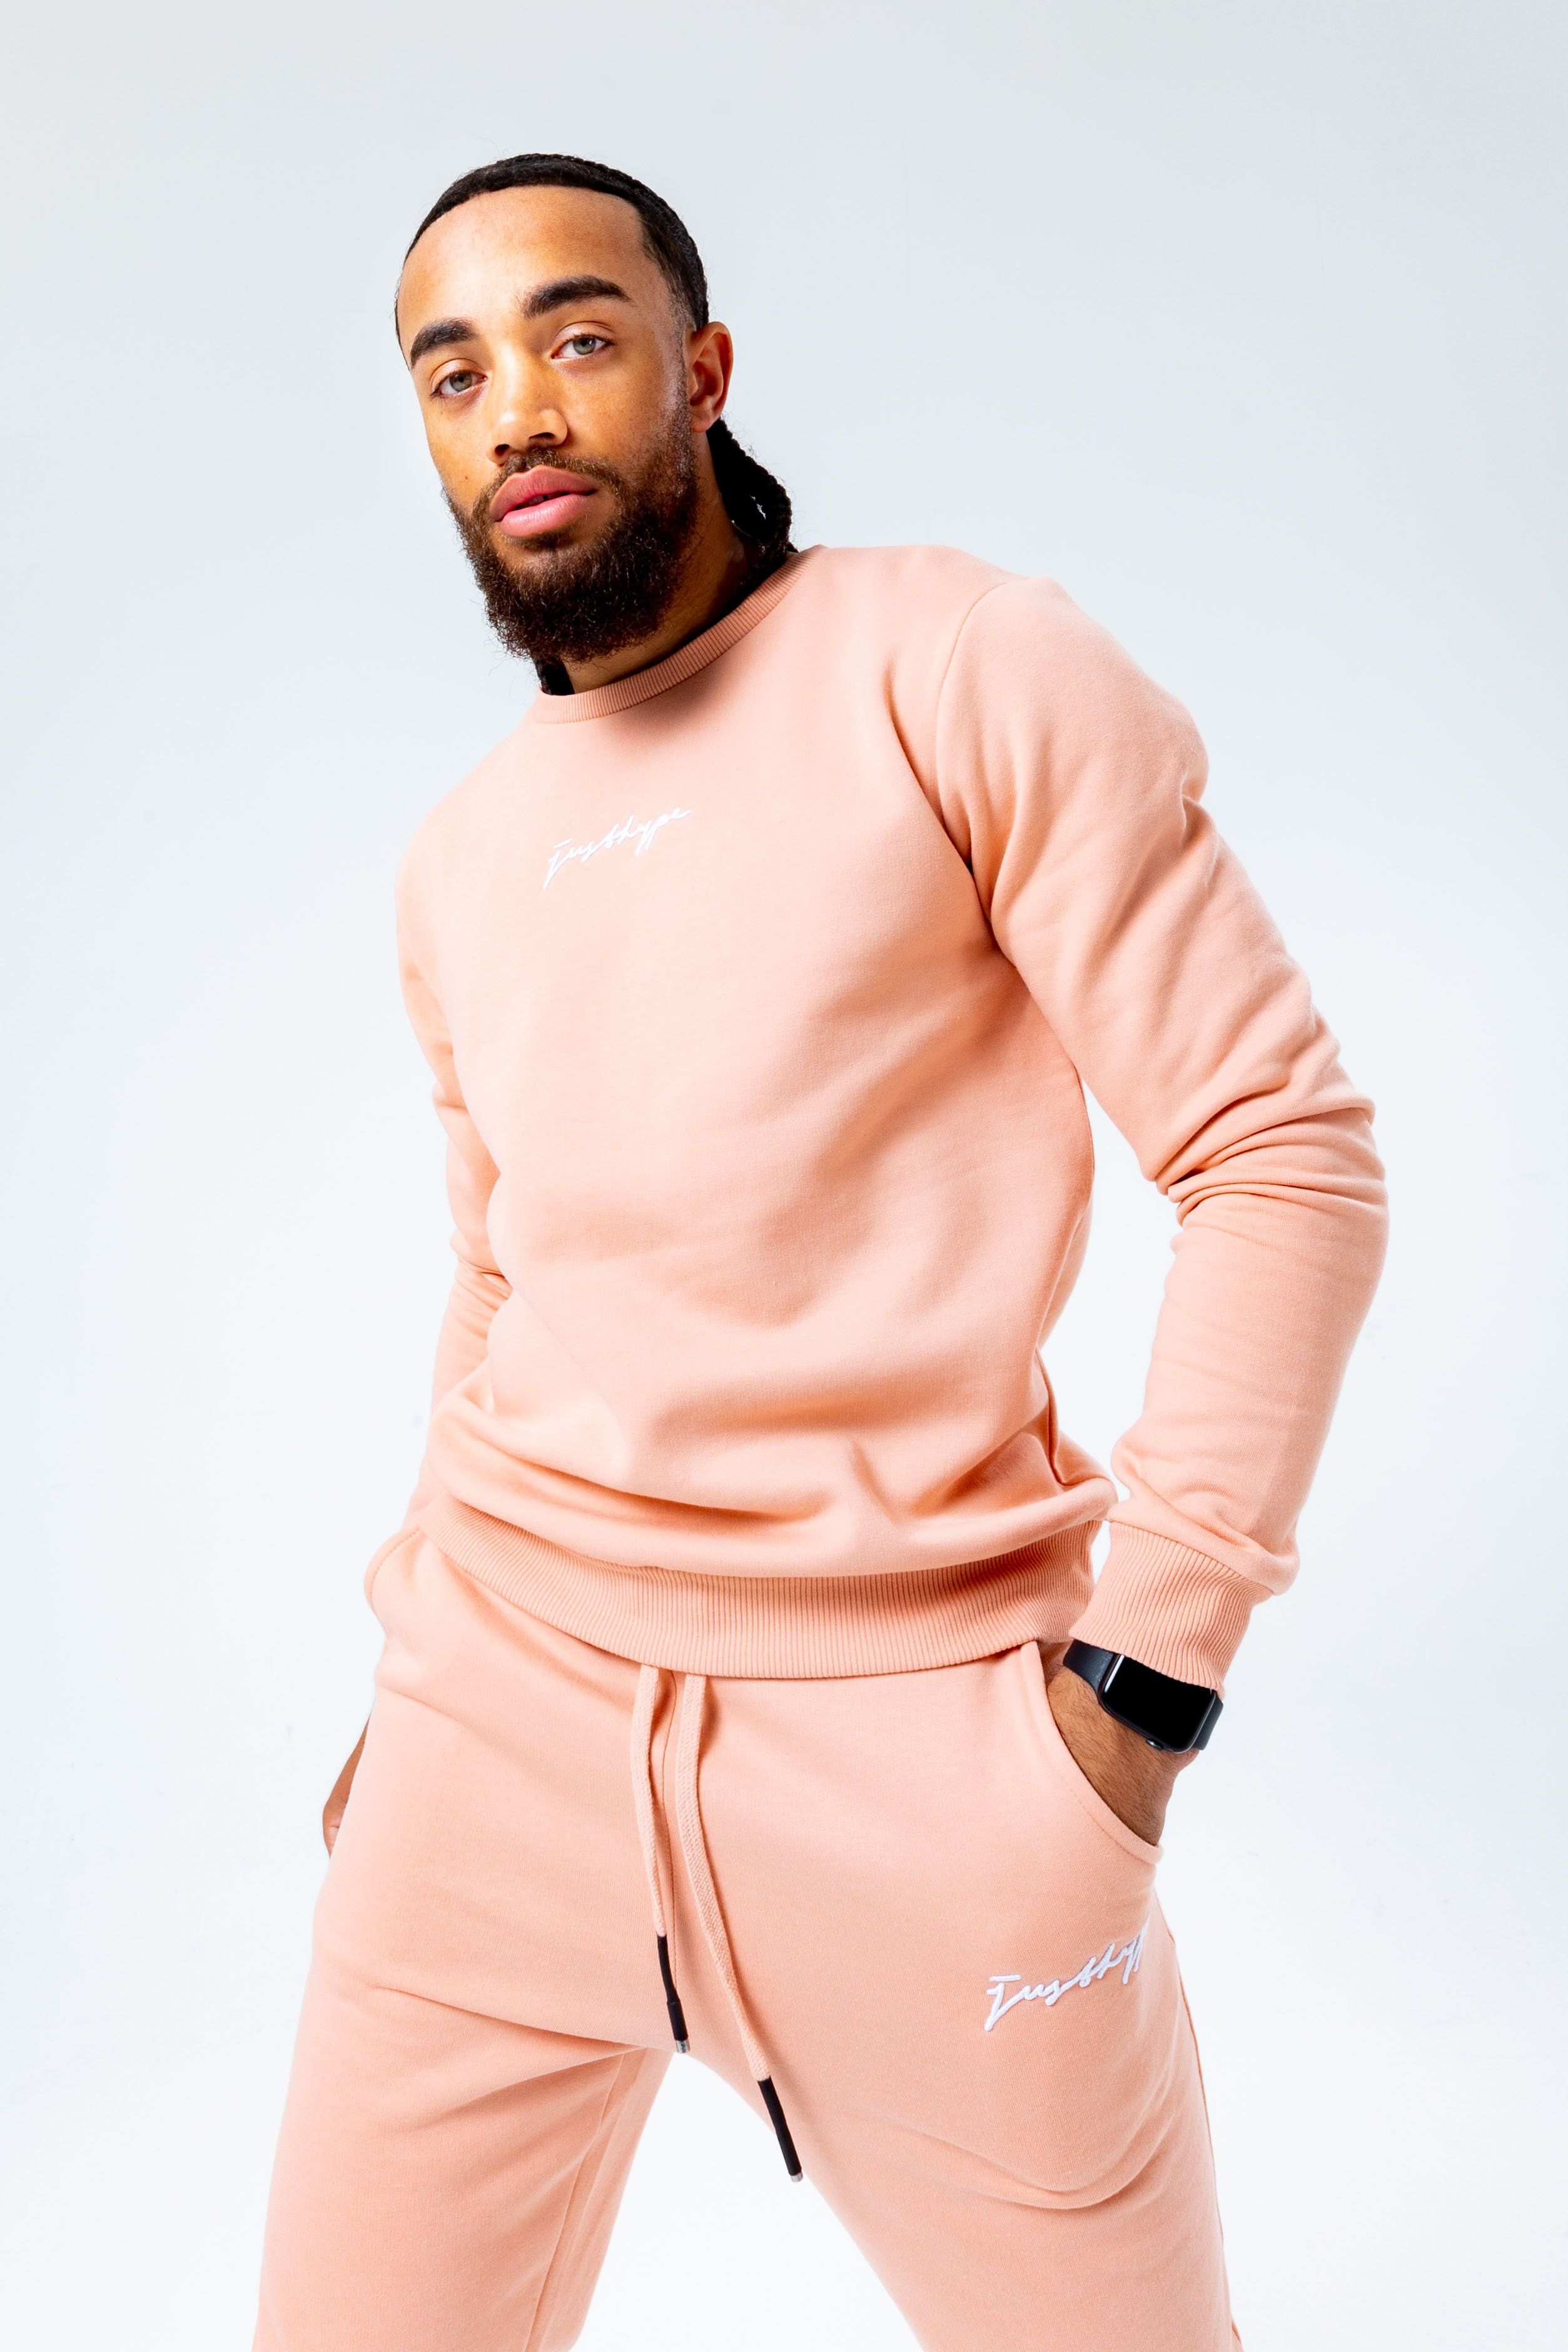 Introducing the HYPE. Pink Signature Men's Crewneck Jumper. Designed in a pink colour palette in a 80% cotton and 20% polyester fabric base for supreme comfort and breathable space. With a crew neckline, long sleeves and fitted hem and cuffs in our standard men's jumper shape. Finished with the new! justhype signature logo embroidered across the front in a contrasting white. Wear with the matching joggers to complete the look. Machine washable.